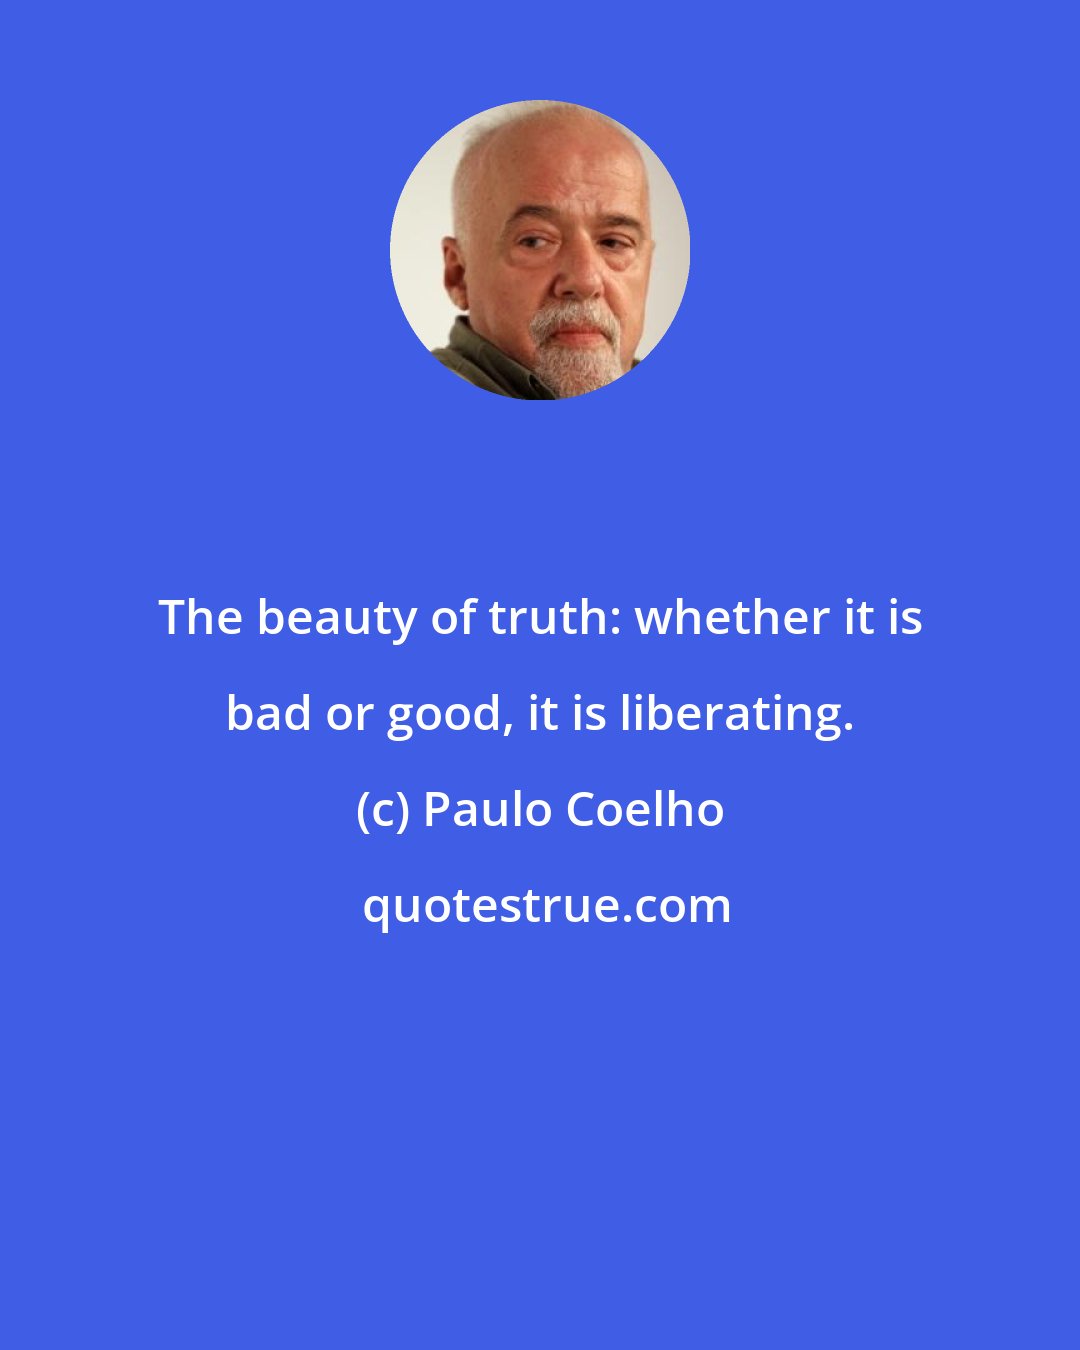 Paulo Coelho: The beauty of truth: whether it is bad or good, it is liberating.